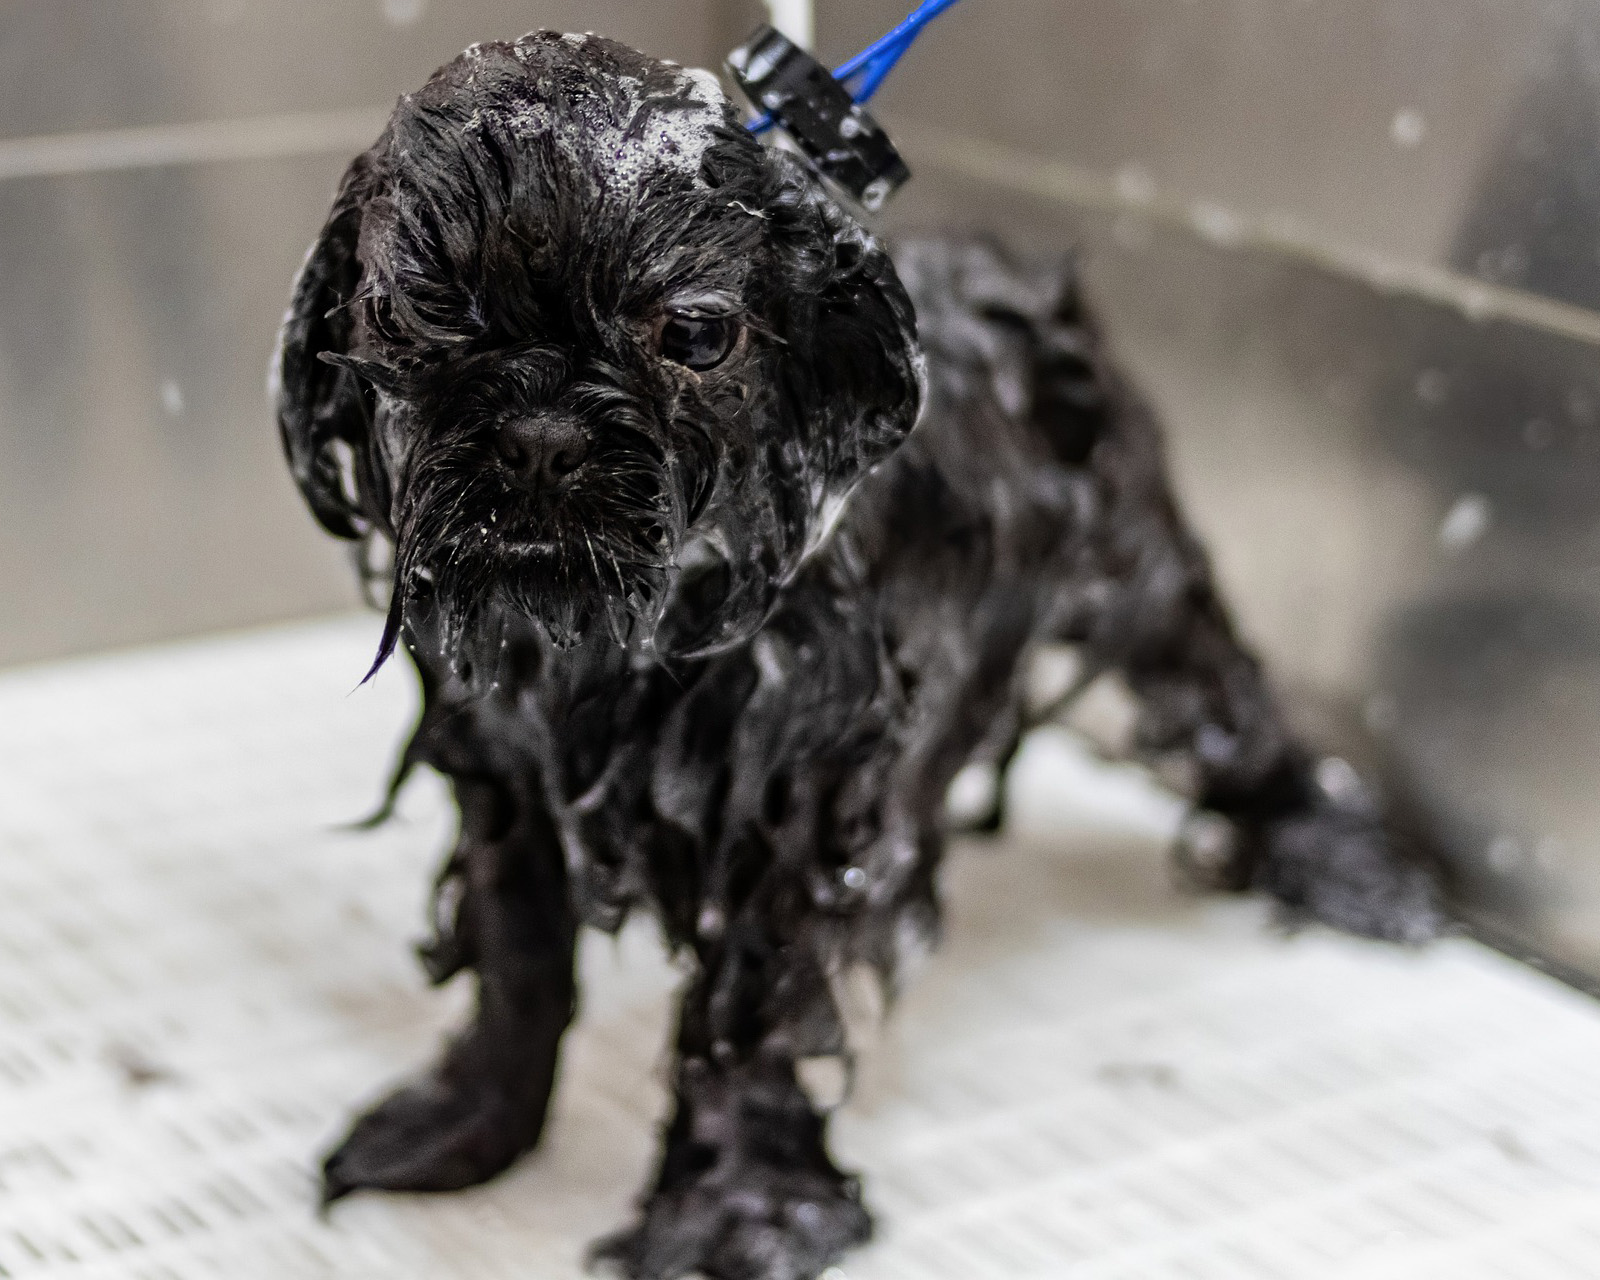 Small black dog getting a bath in the tub at the grooming salon